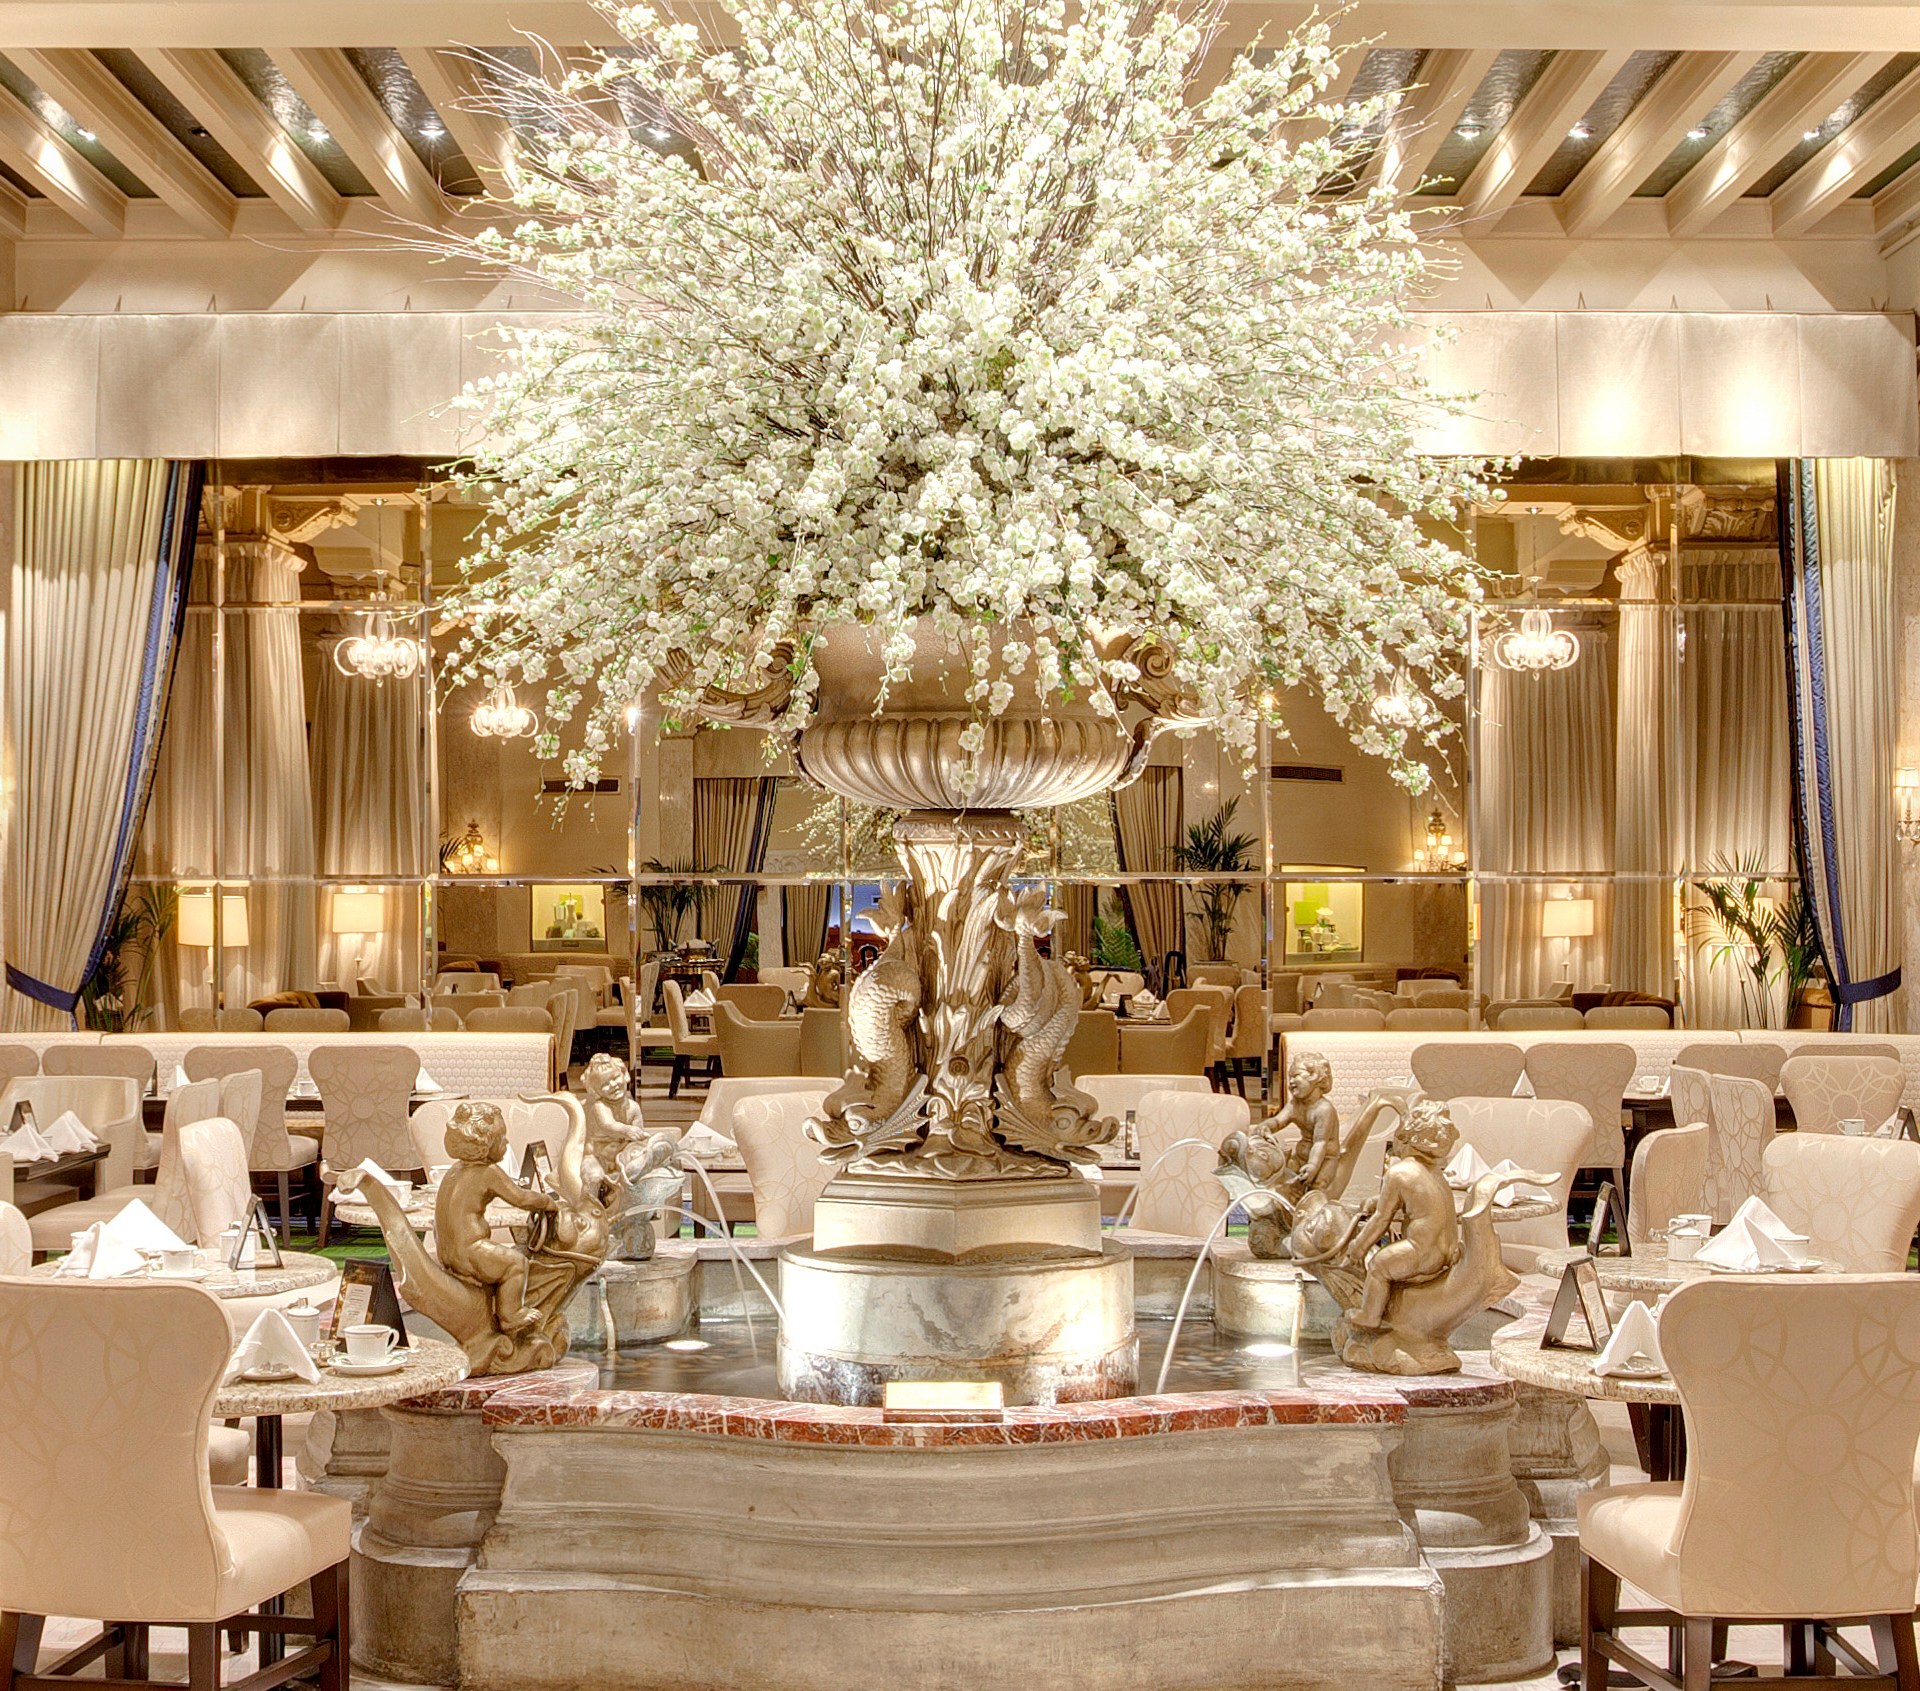 fountain, flower display, dining seating at Palm Court at The Drake Hotel, Chicago